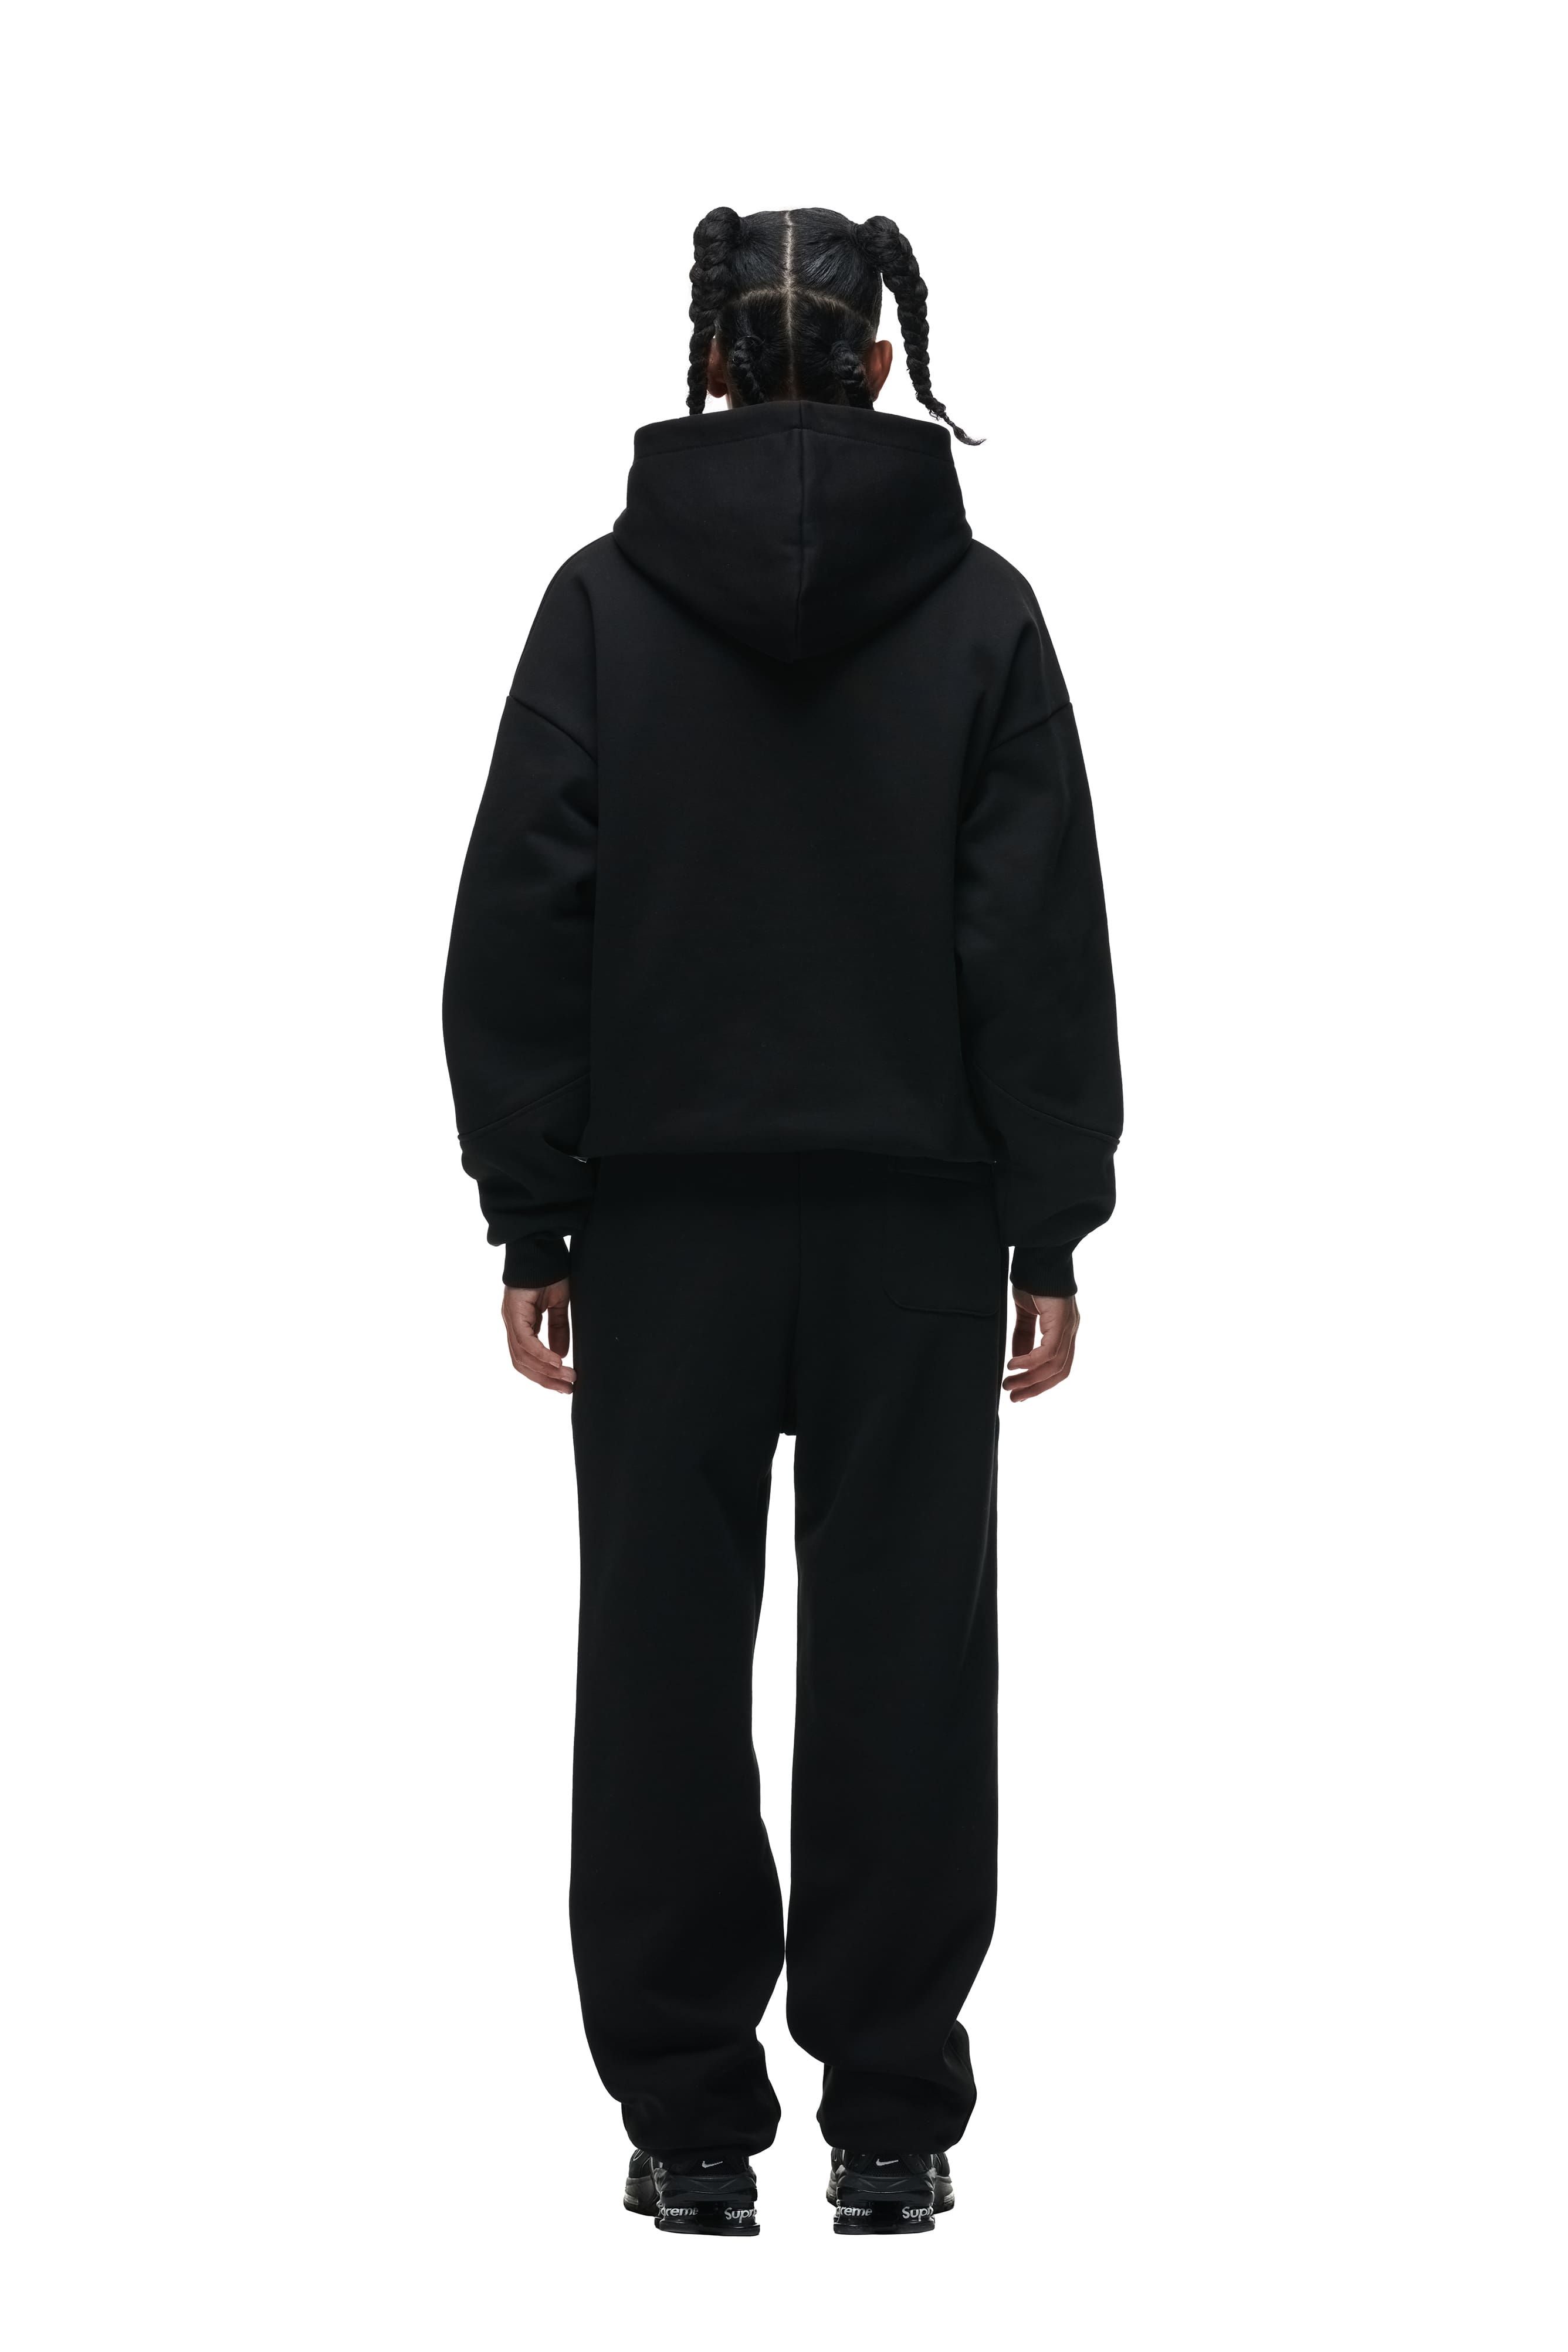 DOUBLE LAYER PLAY HOODIE BLACK – 6PM